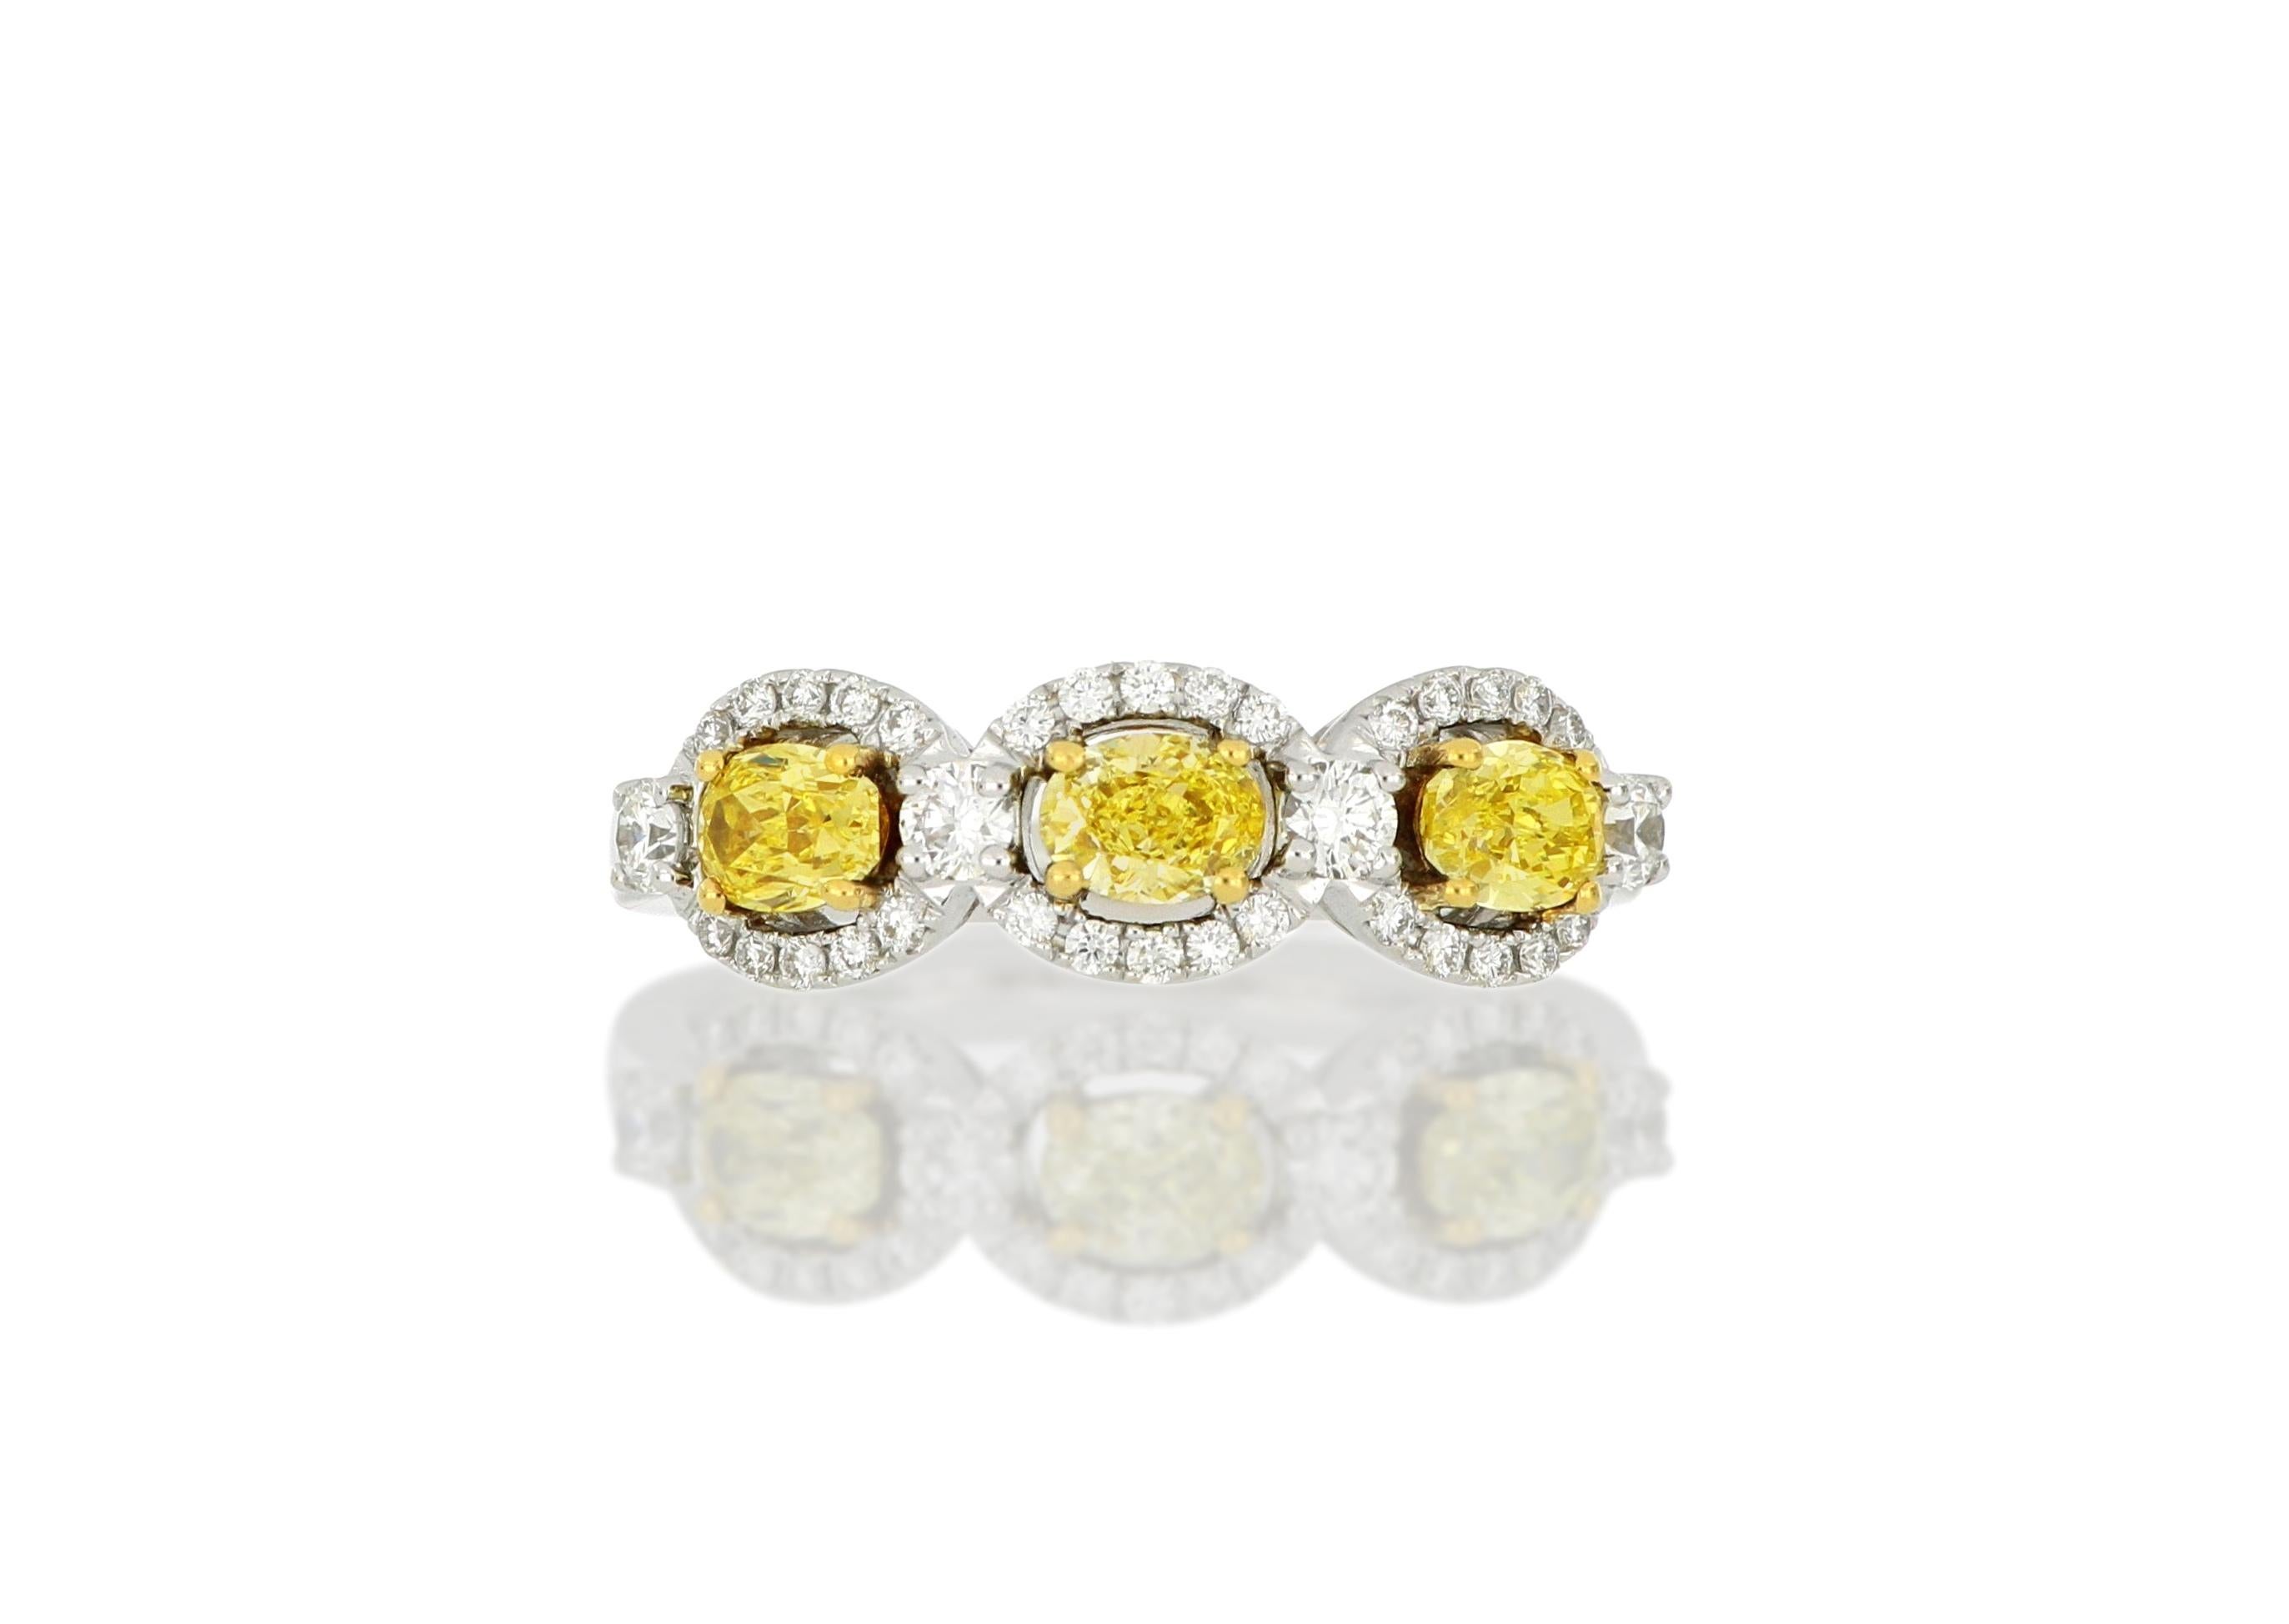 A three-stone yellow diamond ring, set with three oval-shaped natural fancy yellow diamonds weighing approximately 0.69 carats, each within a brilliant-cut white diamond surround,  total weighing approximately 0.32 carats, mounted in 18 Karat white